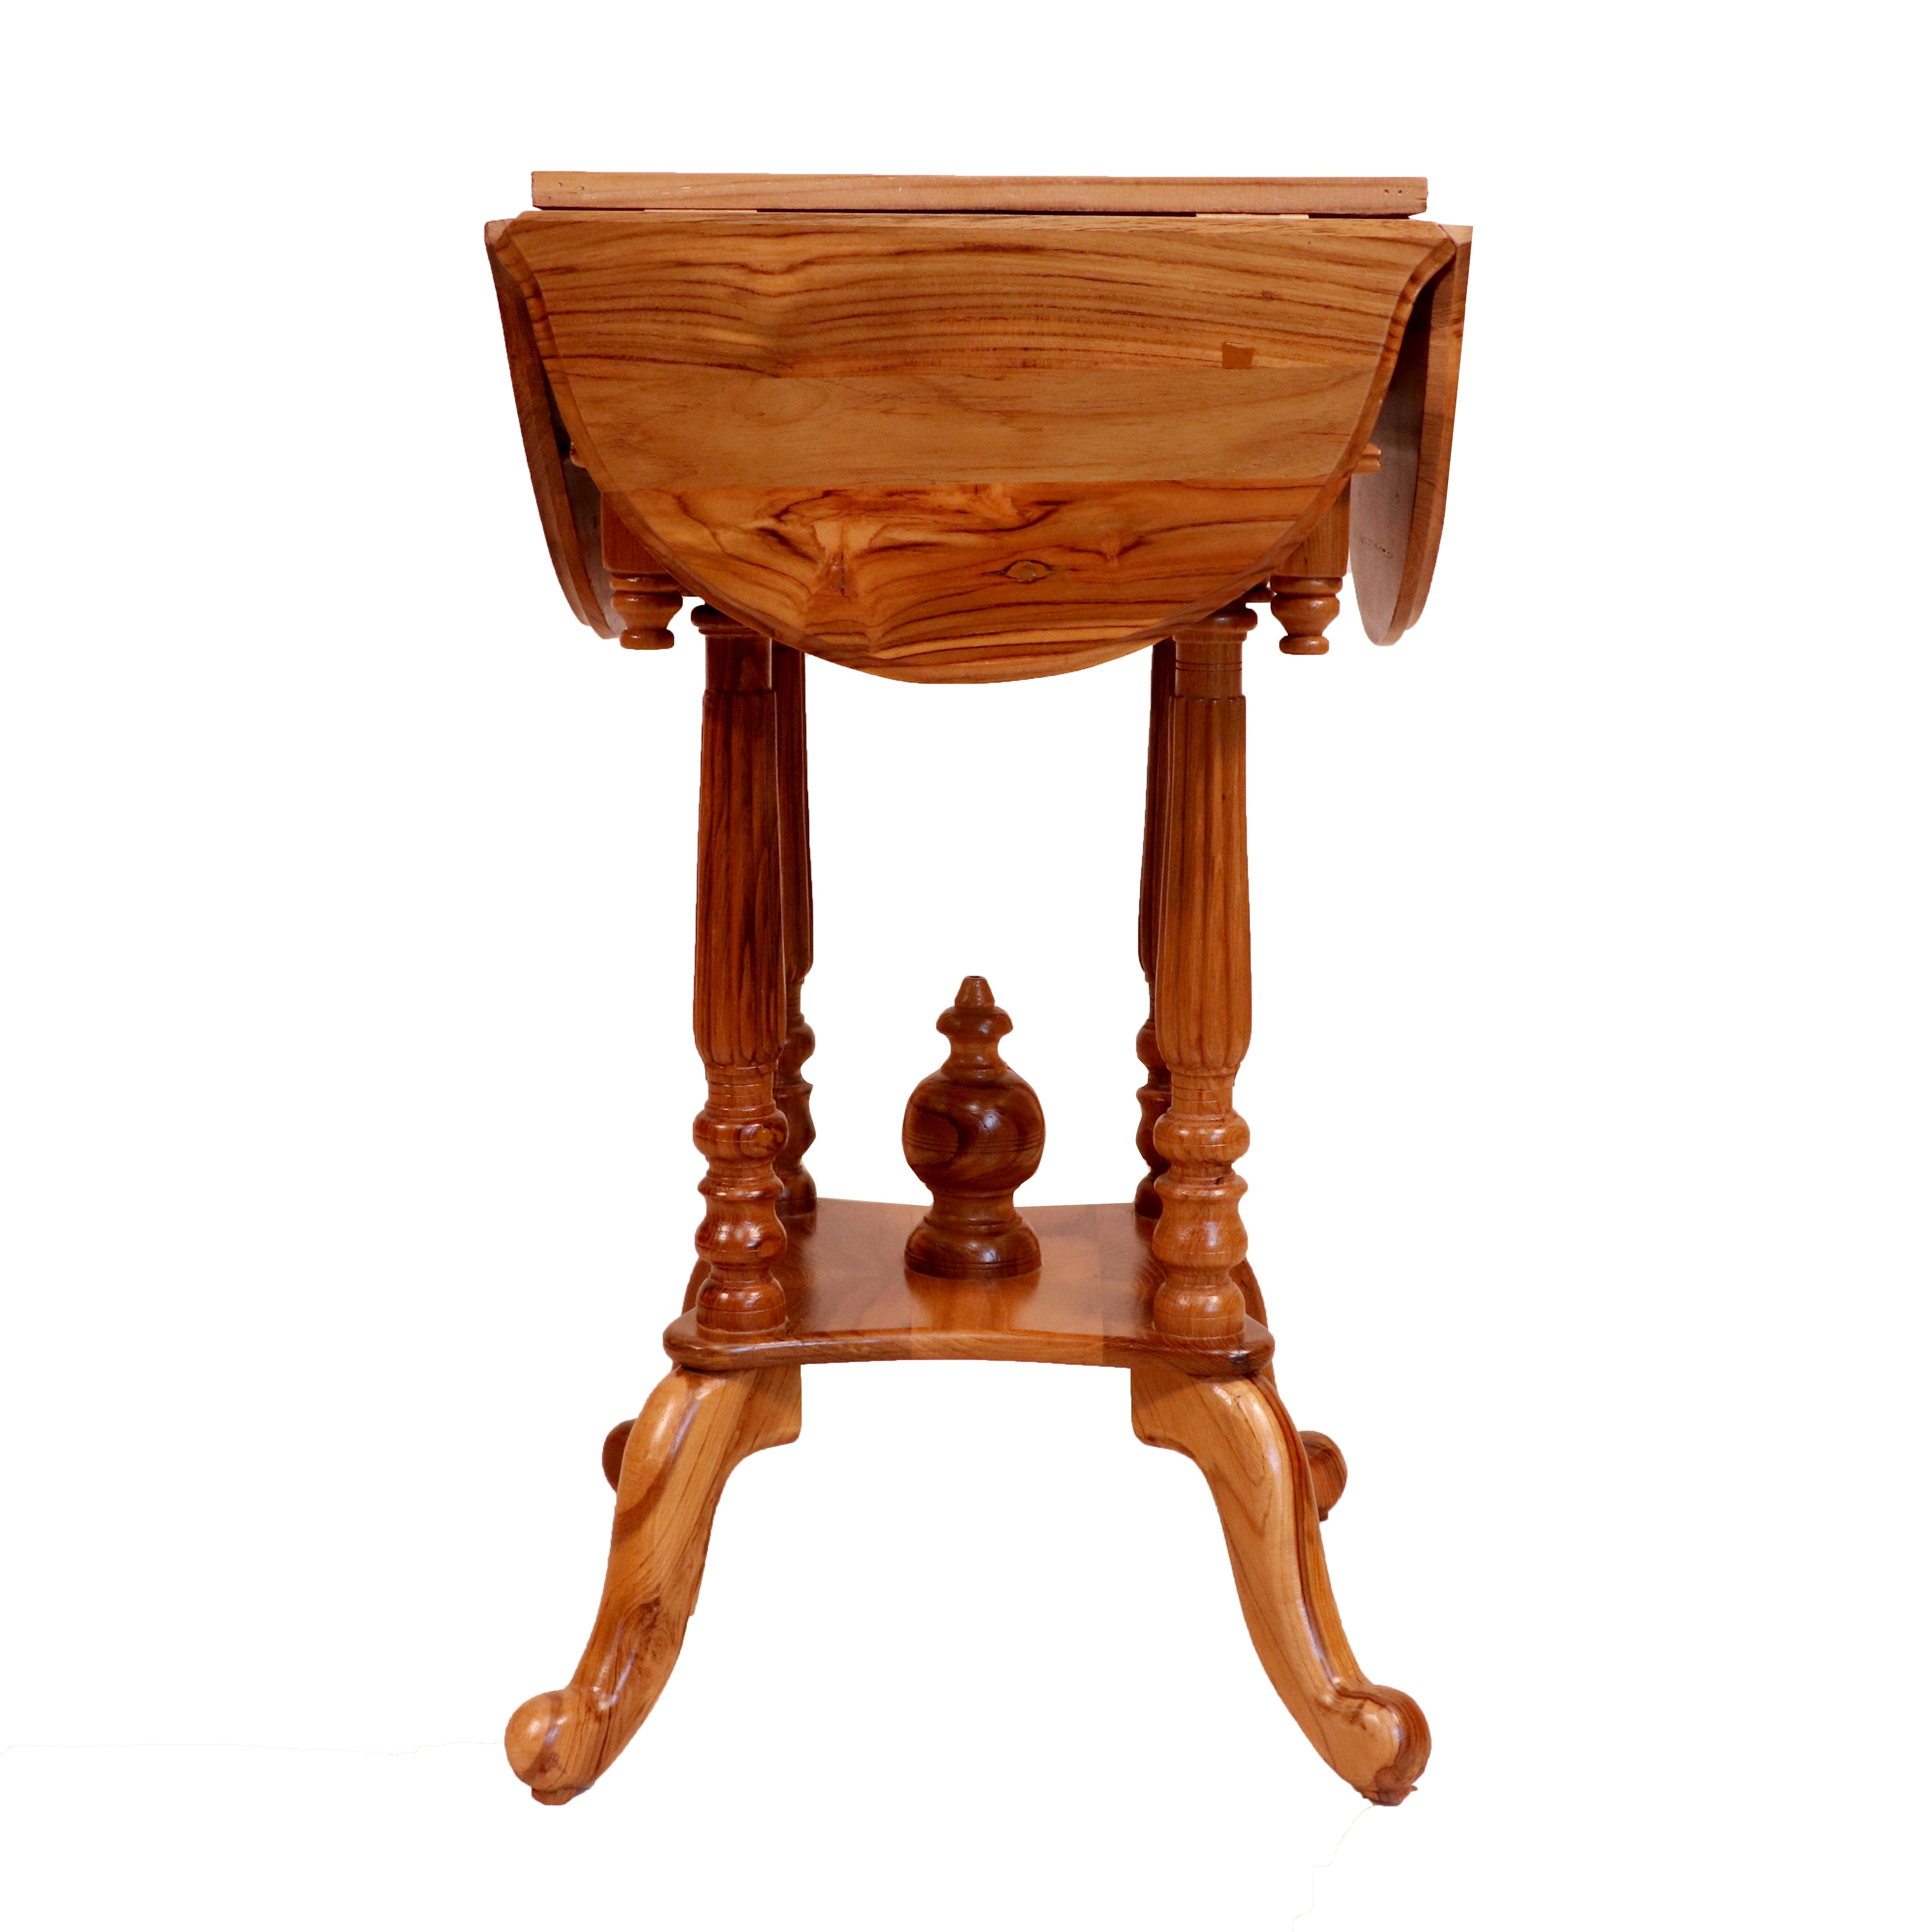 Charming Chess Style Handmade Wooden End Table for Home End Table